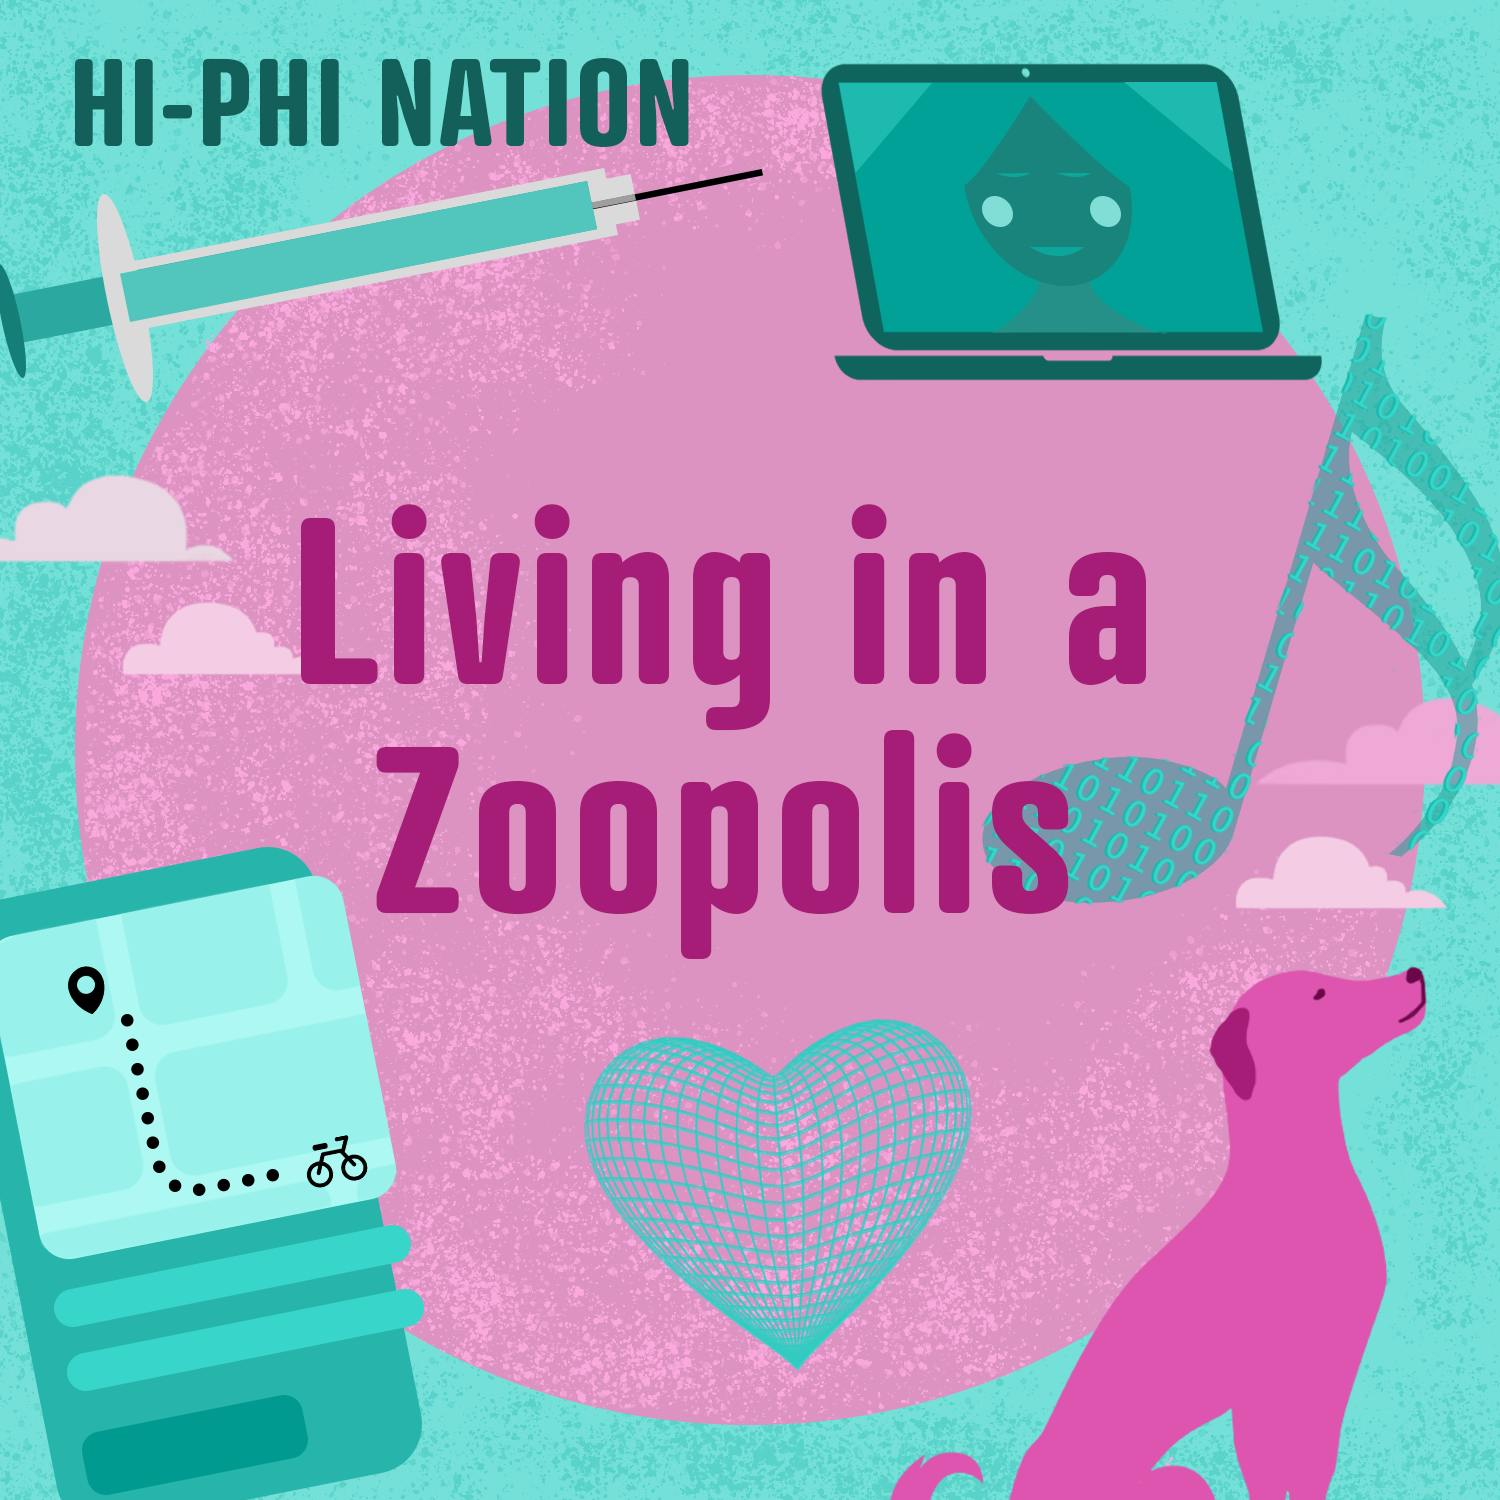 Hi-Phi Nation: Living in a Zoopolis